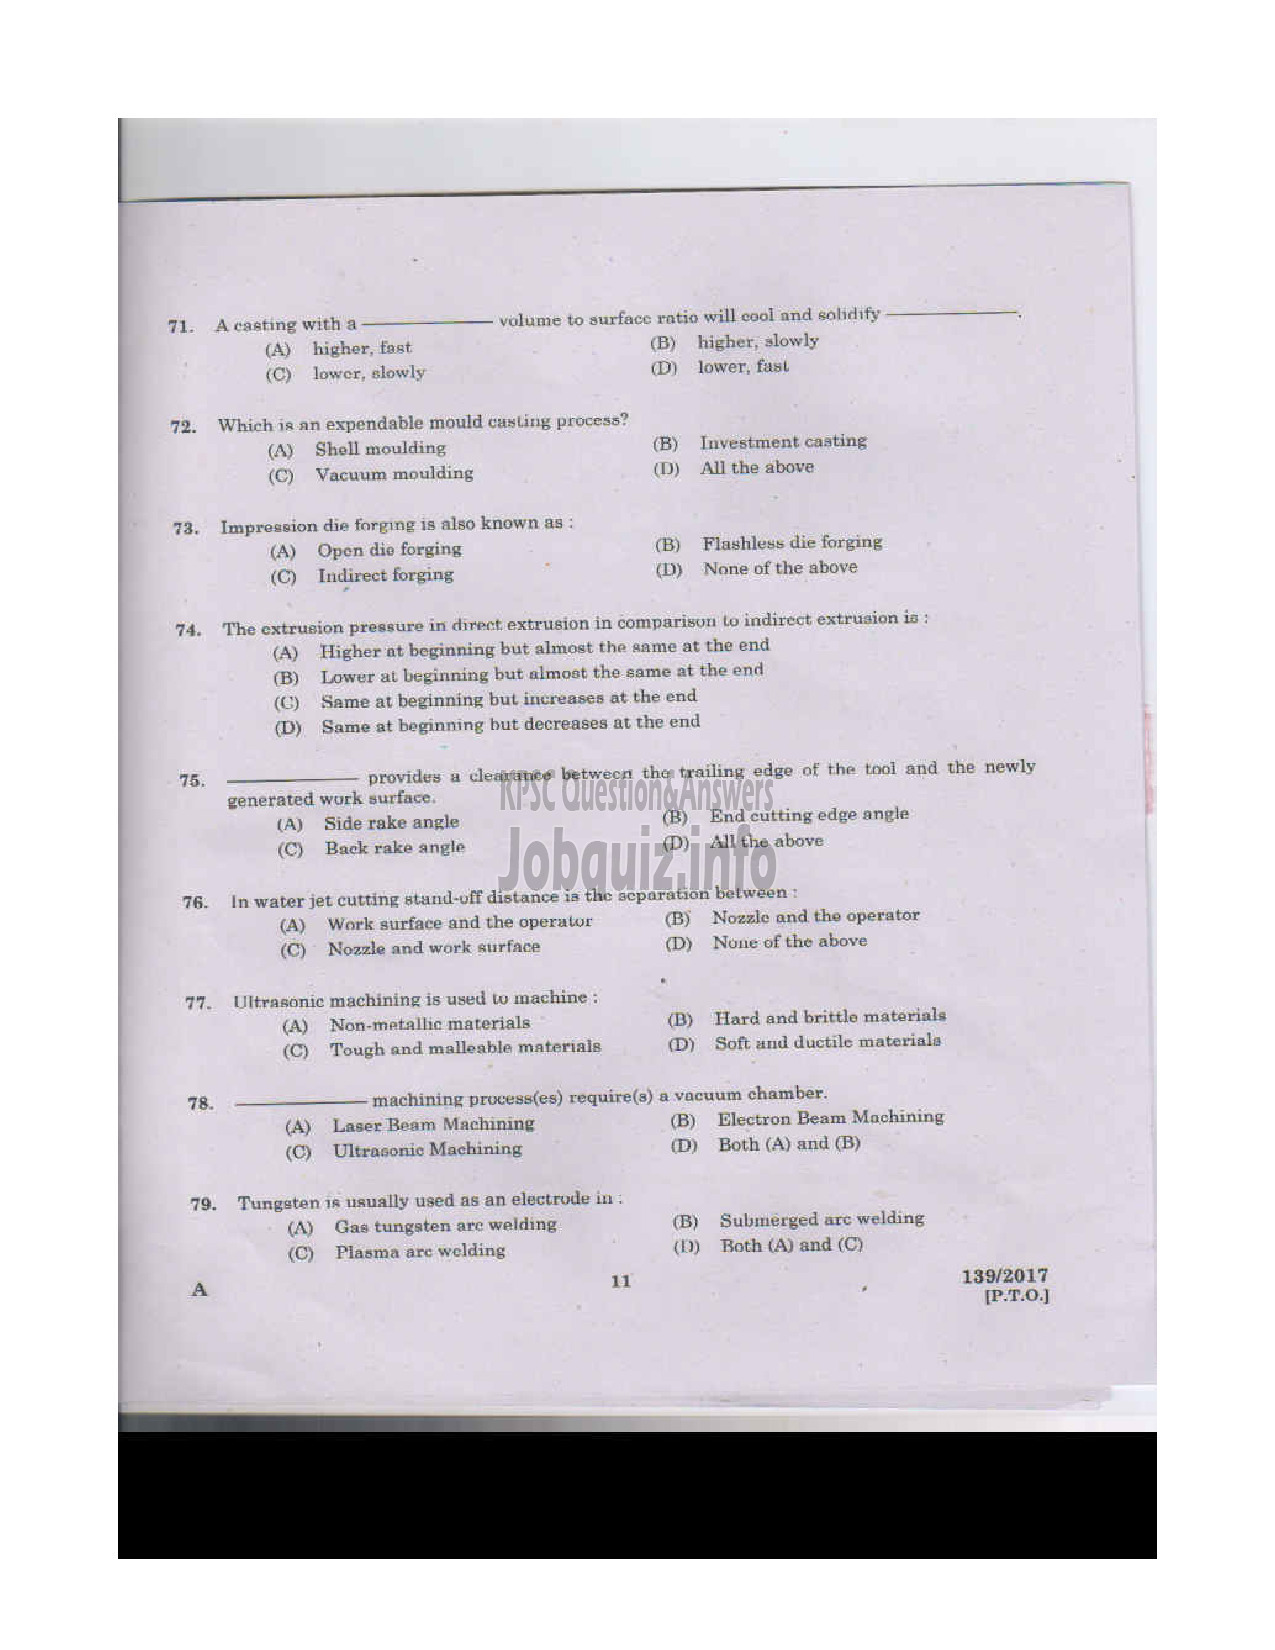 Kerala PSC Question Paper - ASSISTANT ENGINEER GROUND WATER DEPARTMENT-10